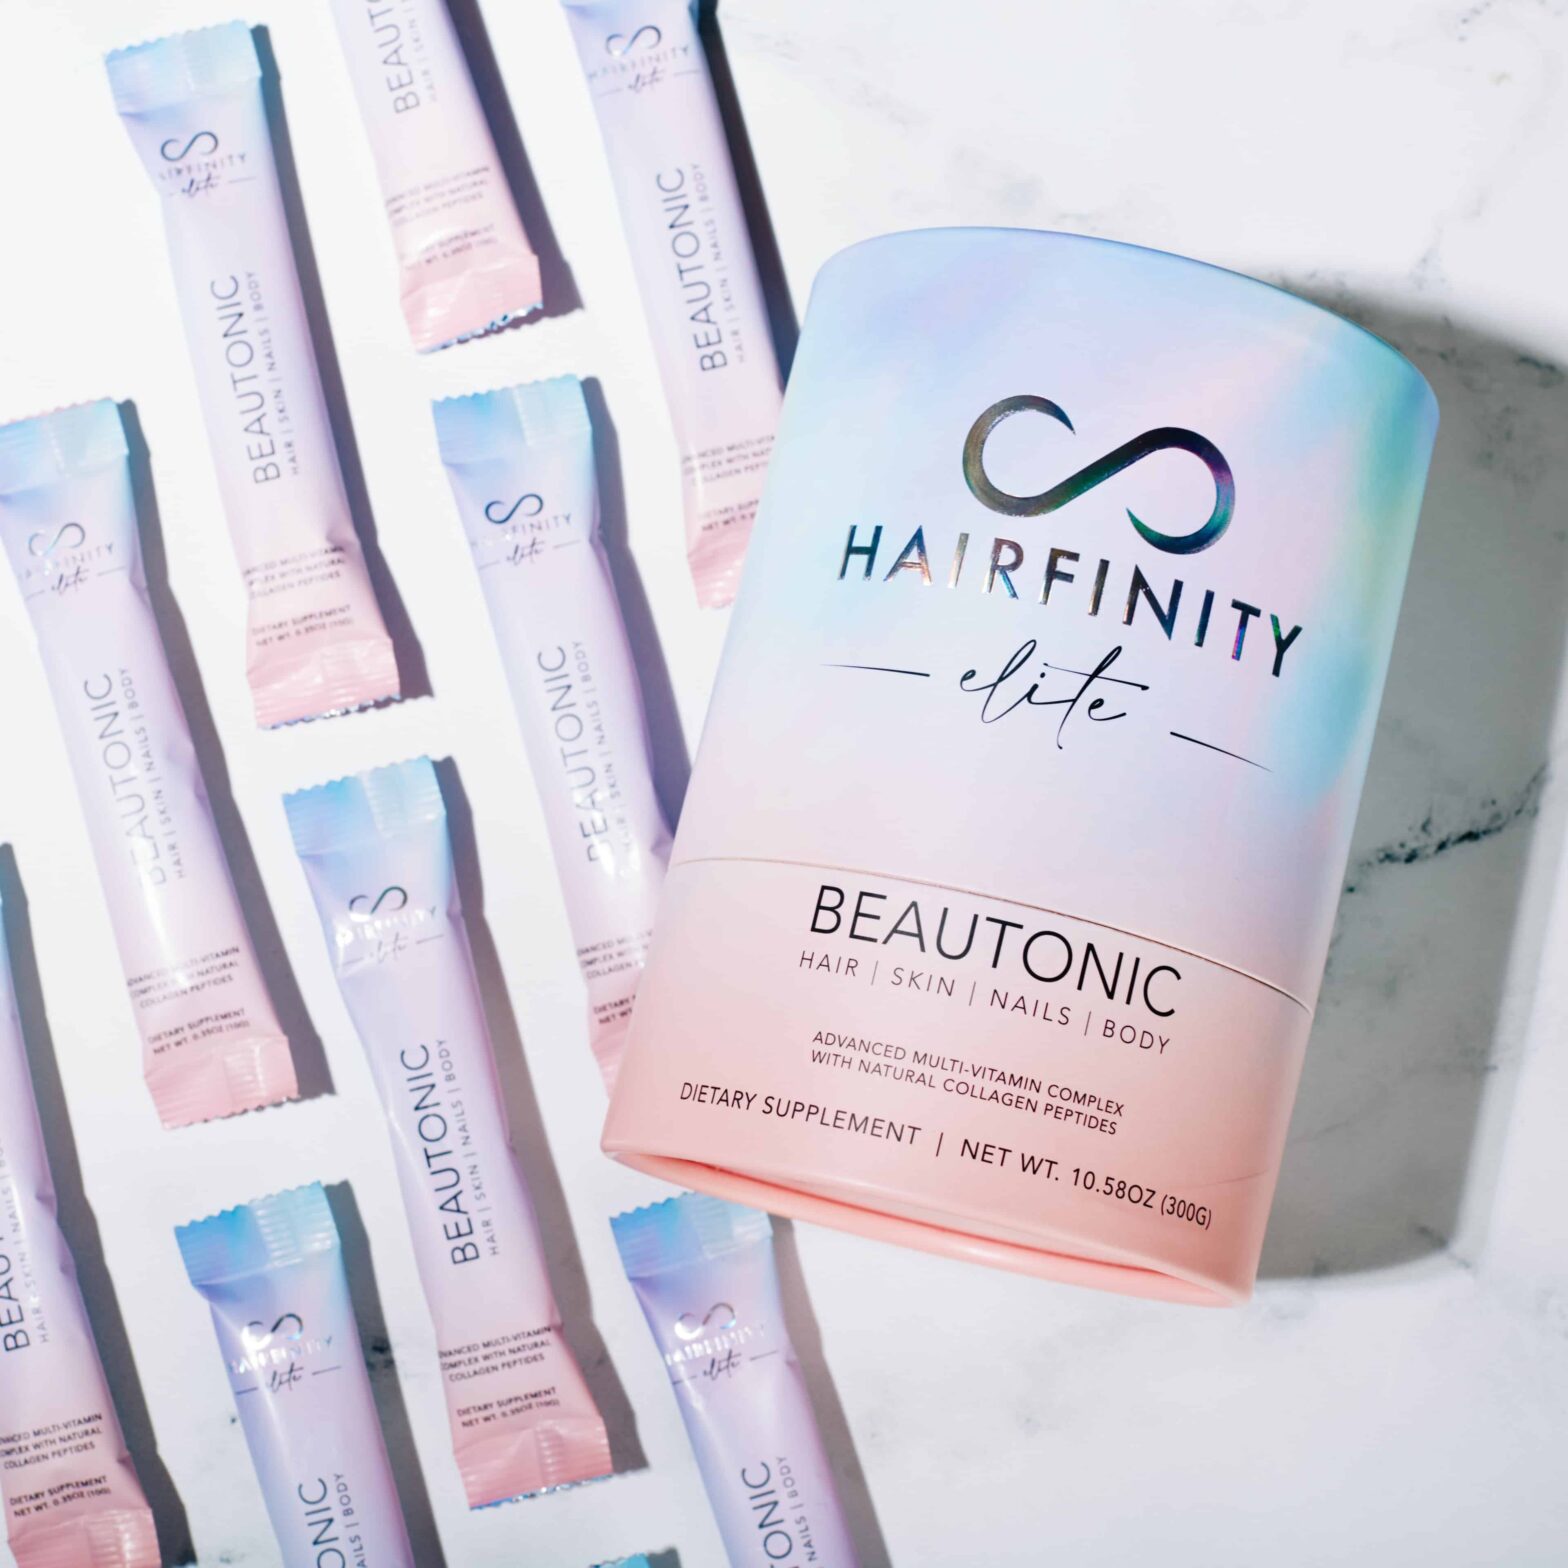 a light blue image of a container of Hairfinity Elite Beautonic 8 sachets of Beautonic